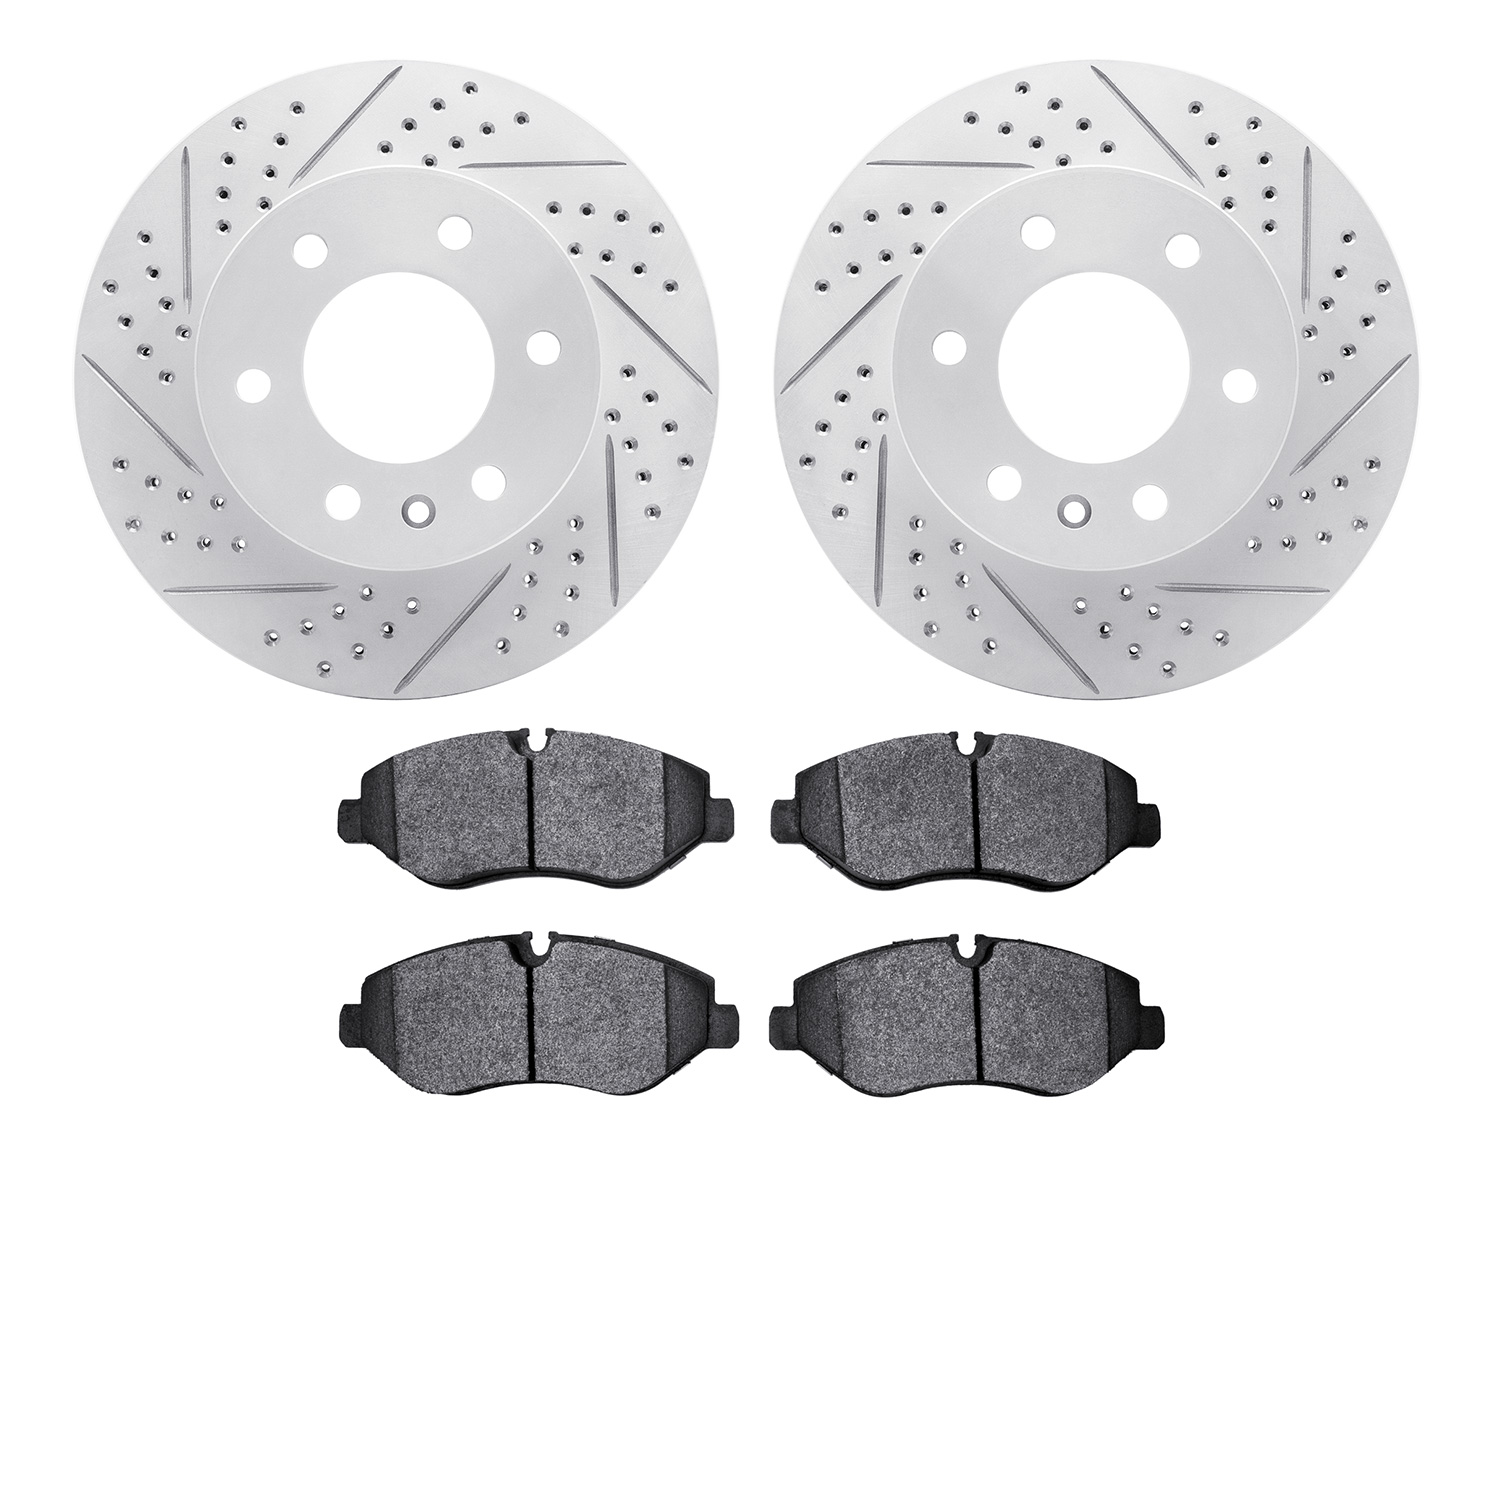 2202-40028 Geoperformance Drilled/Slotted Rotors w/Heavy-Duty Pads Kit, 2007-2018 Multiple Makes/Models, Position: Front